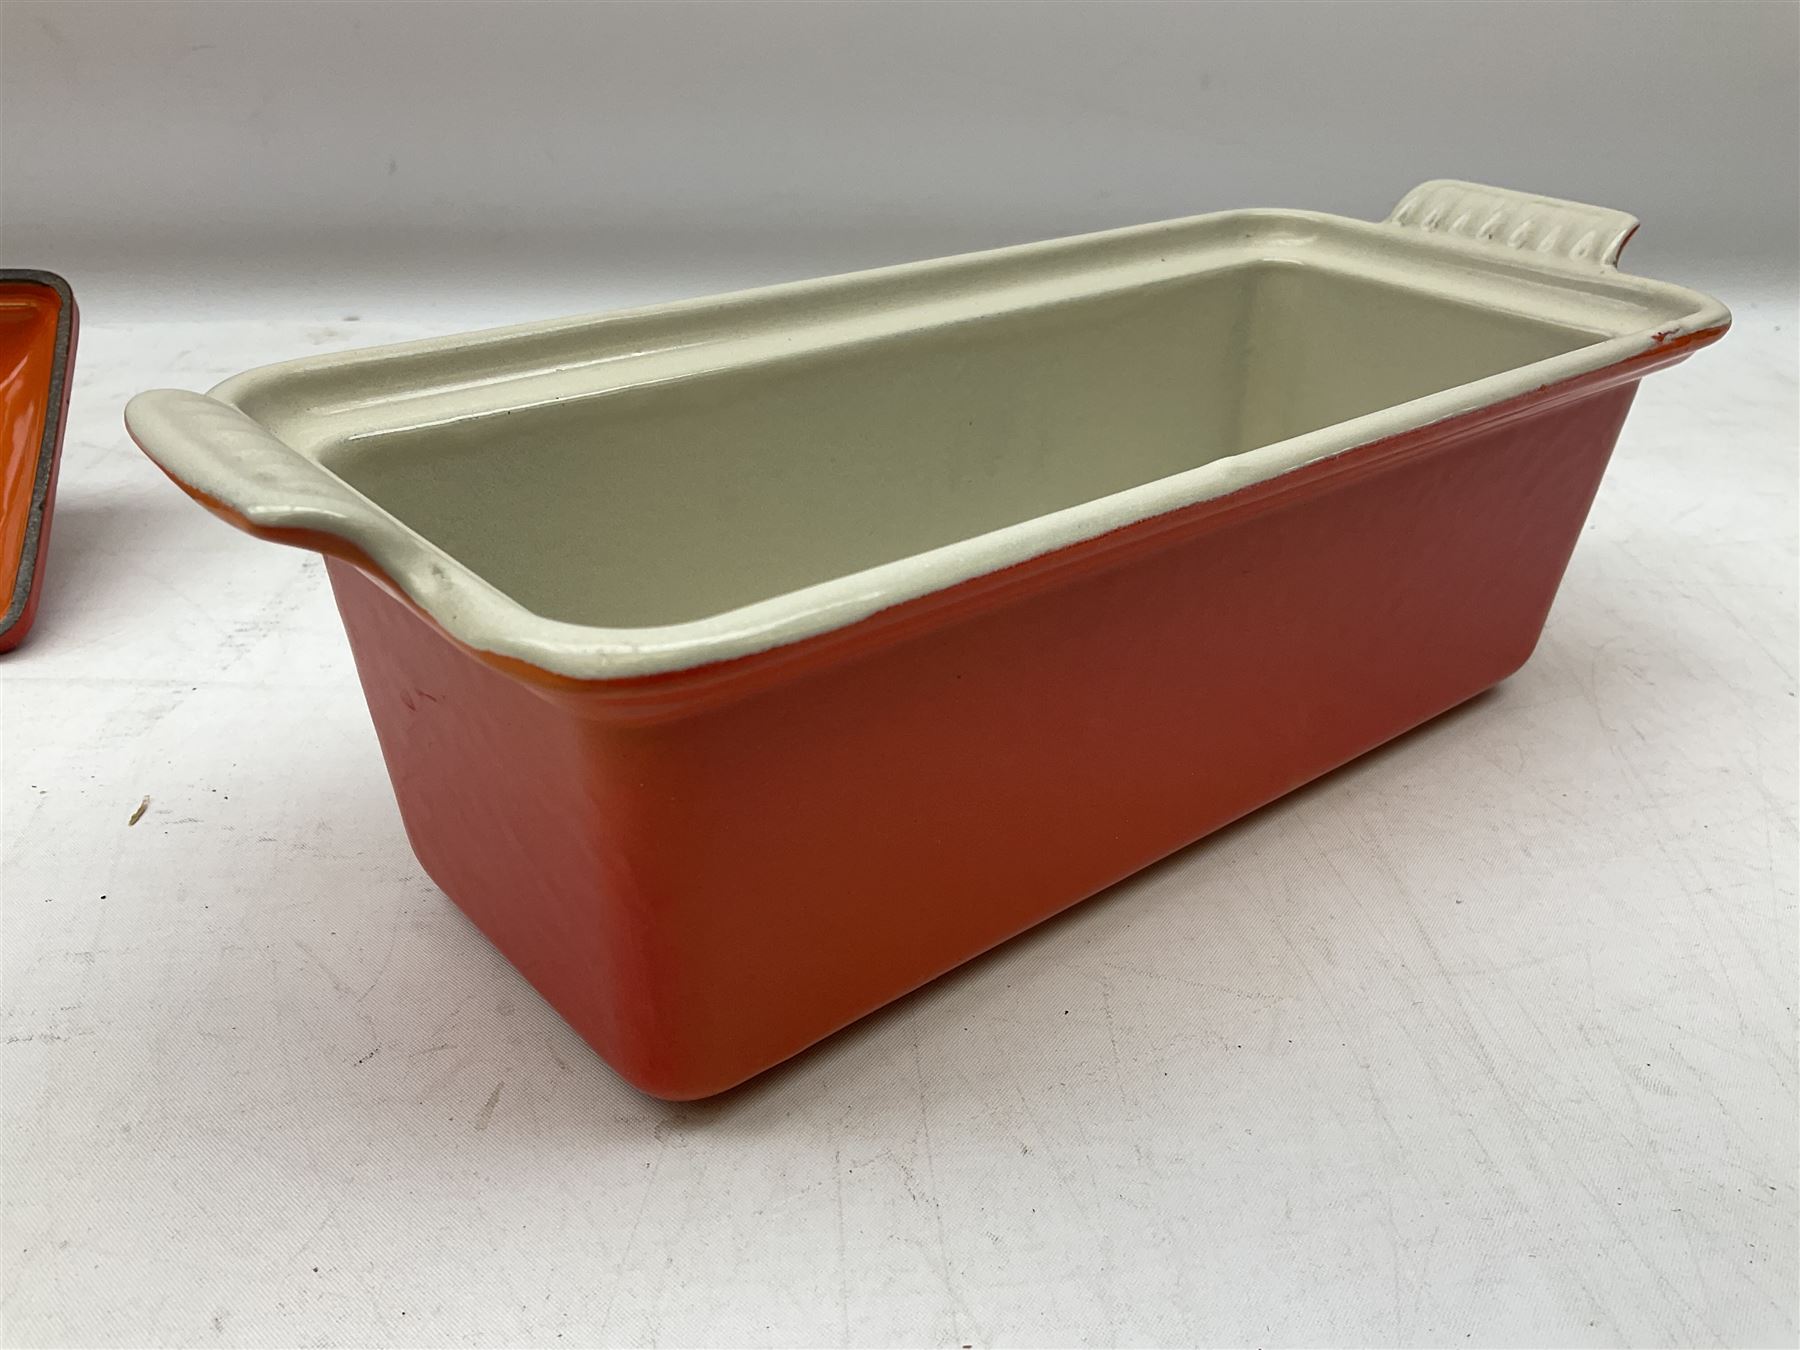 Le Creuset cast iron and enamel lidded tureen in the orange colourway - Image 3 of 6